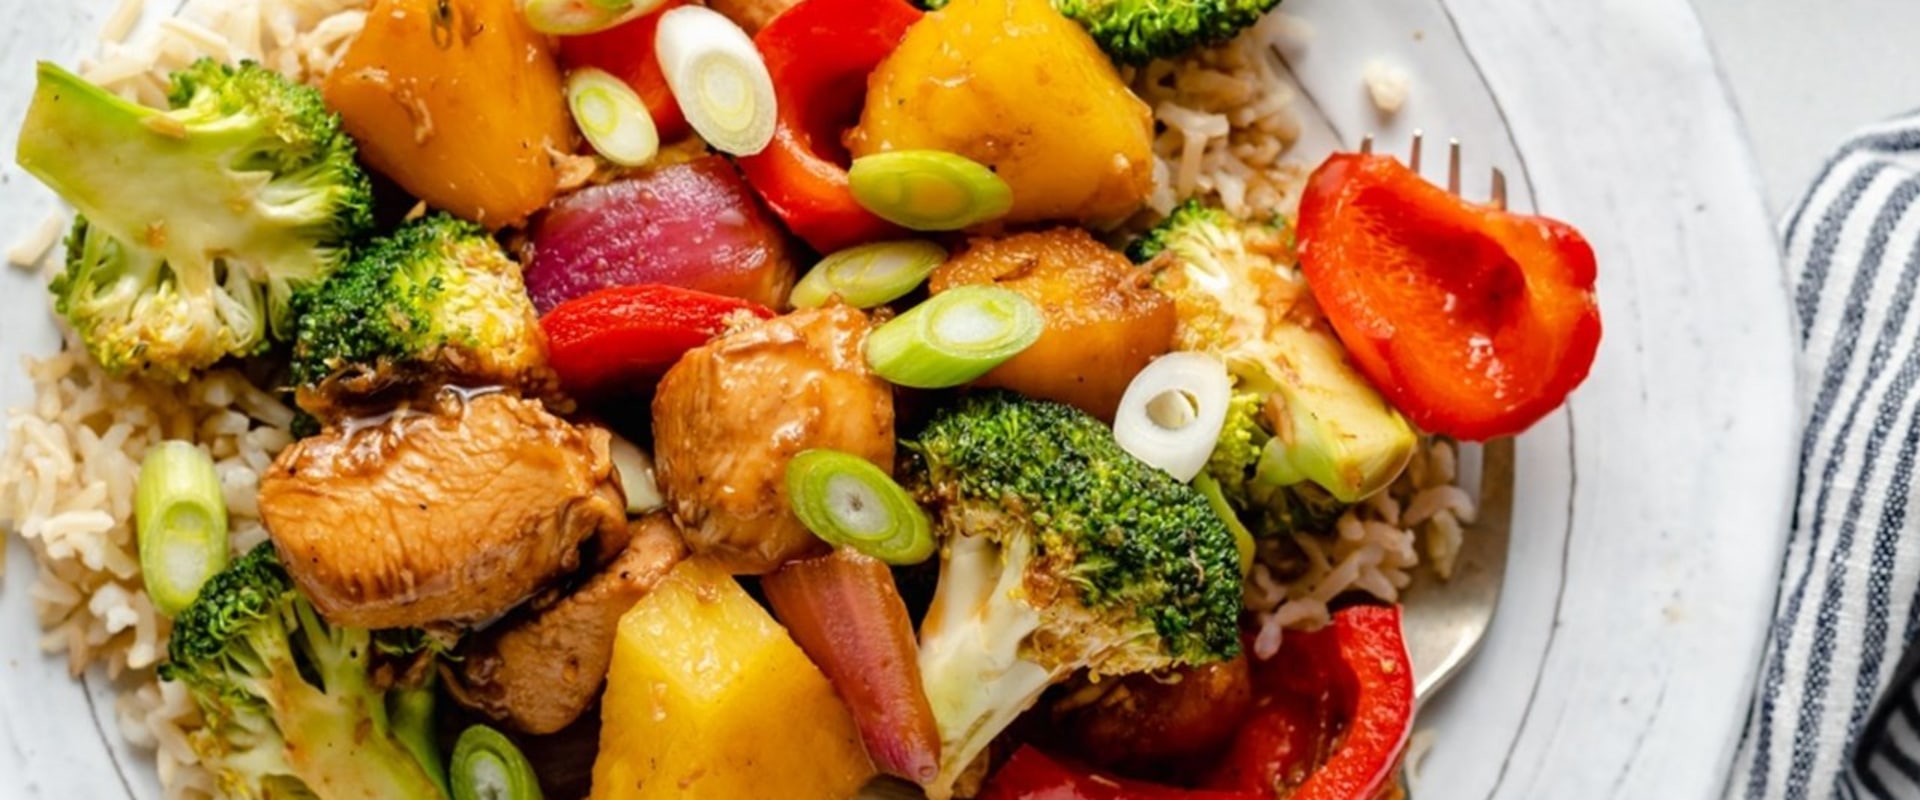 How to Make Sweet and Sour Chicken Stir Fry: A Delicious and Easy Recipe for Mushroom Lovers